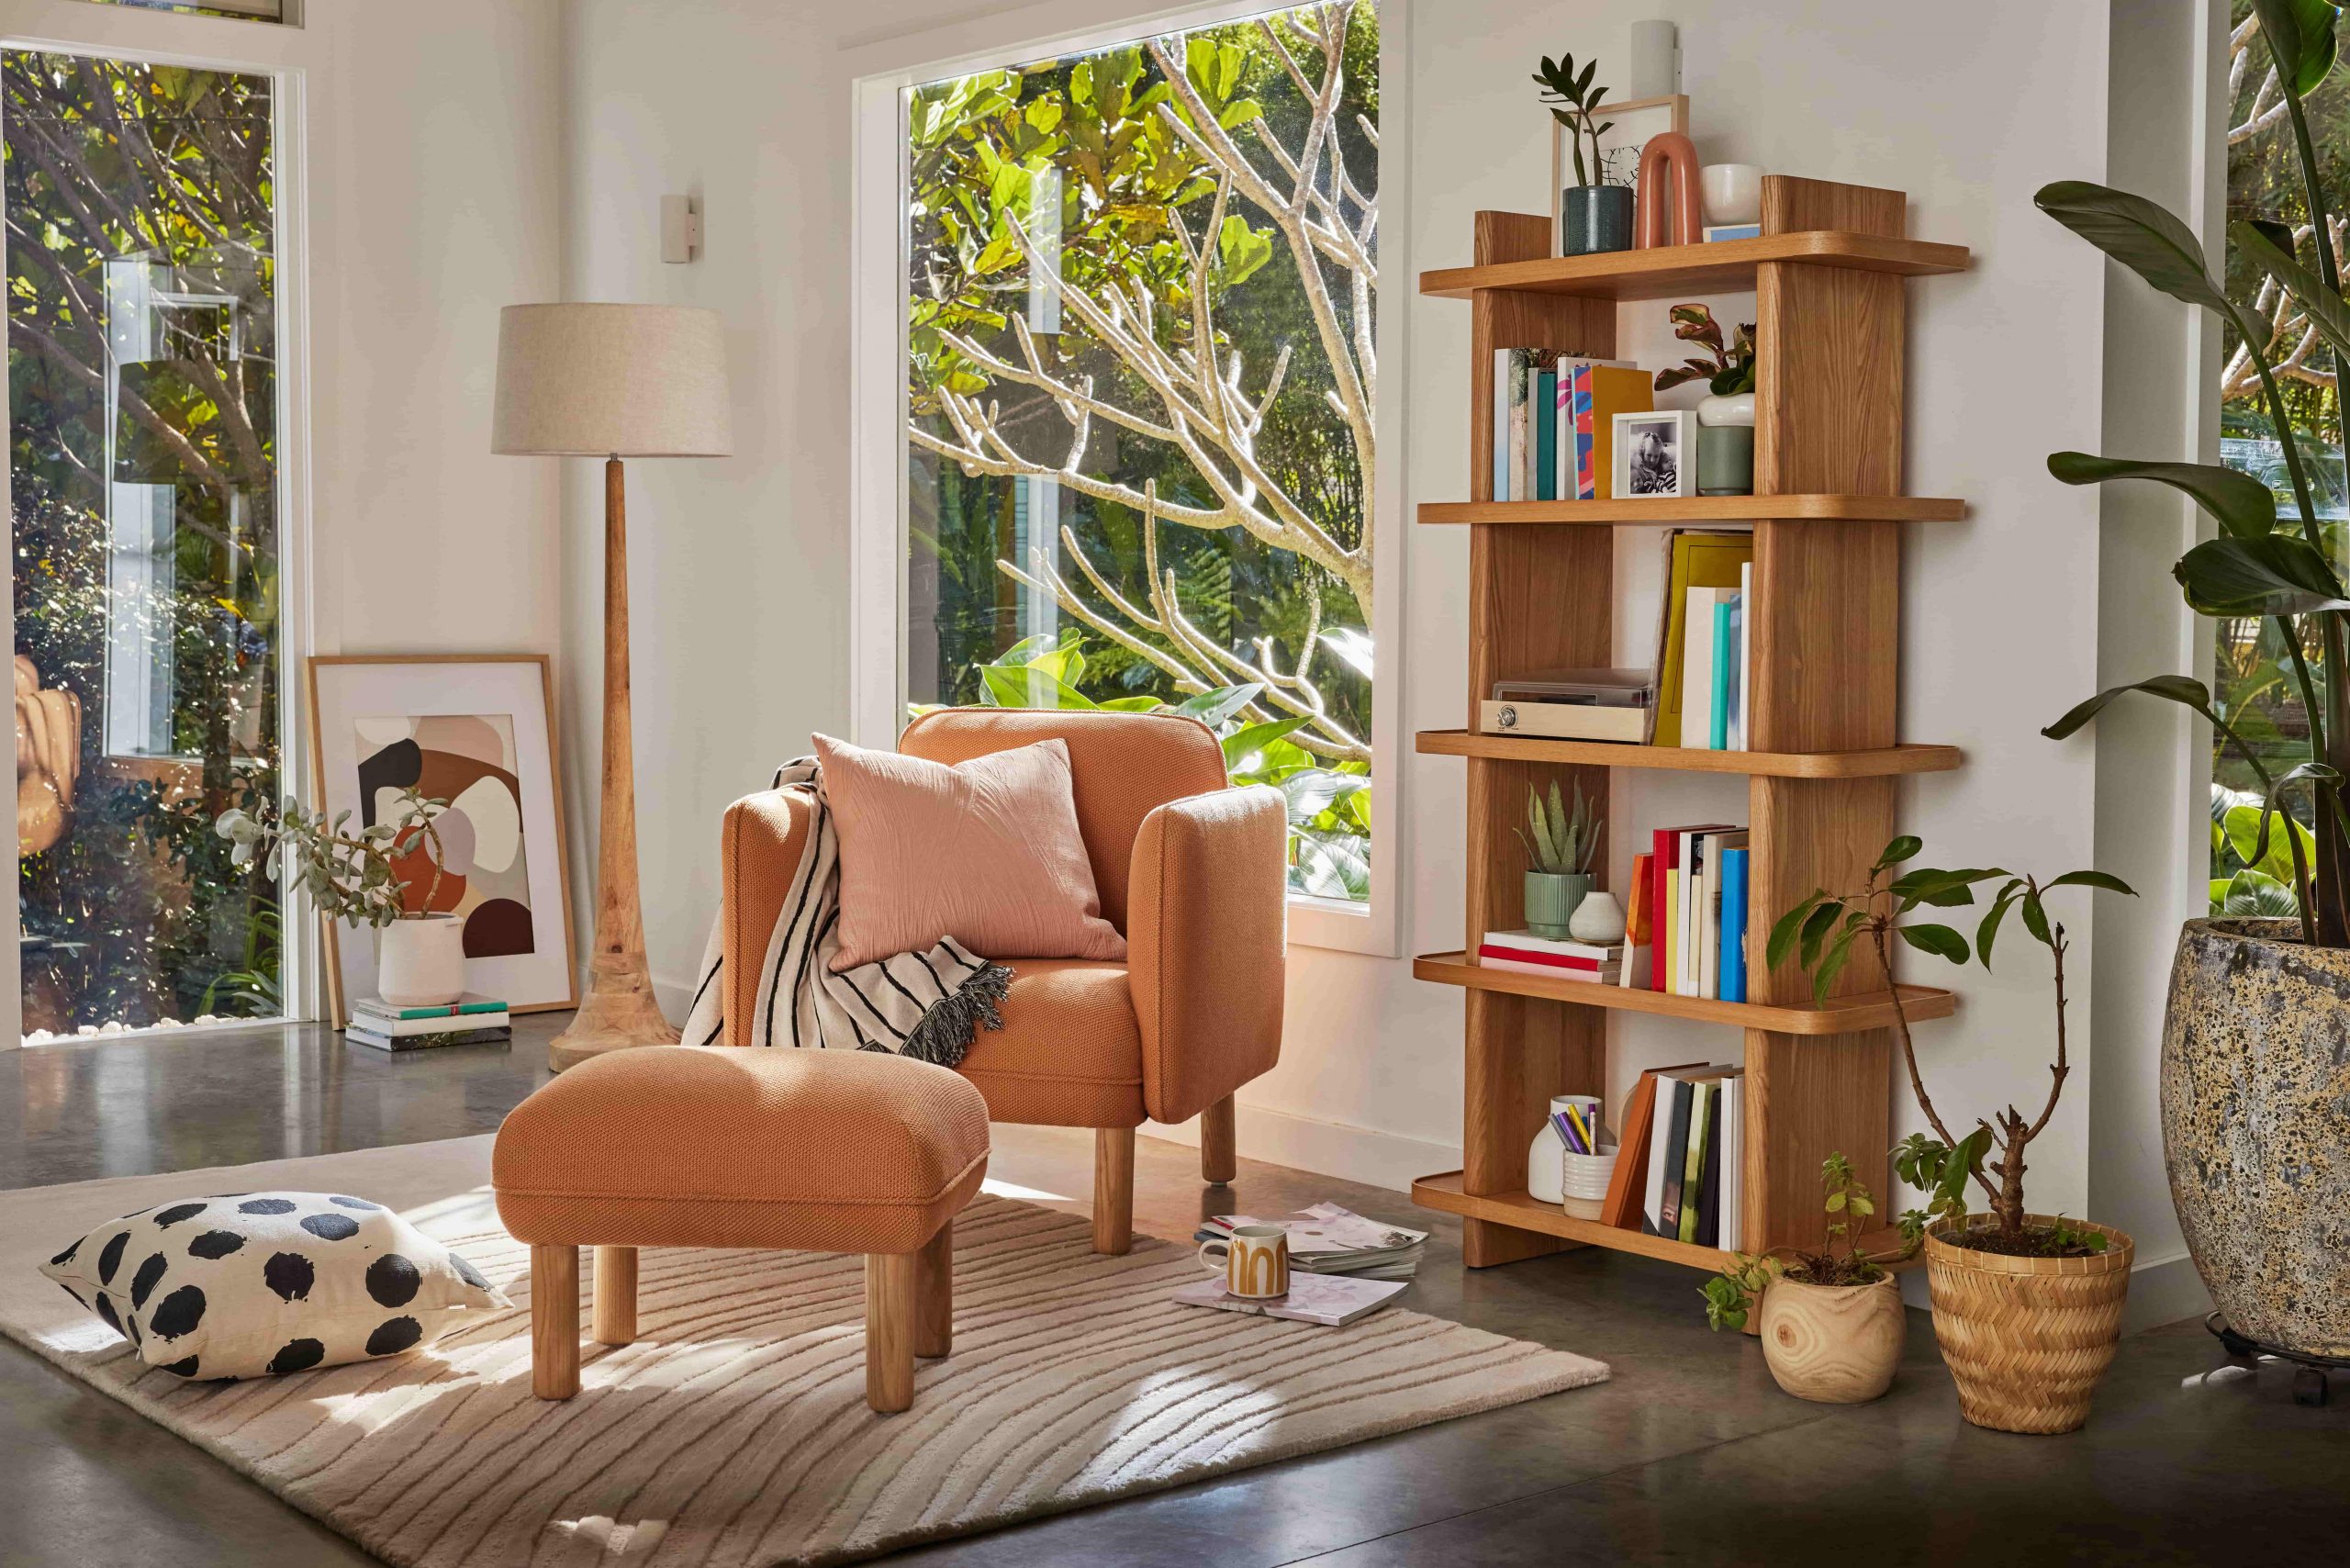 An orange single seater armchair and ottoman with a pink cushion, black and white throw rug and timber bookshelf filled with books 